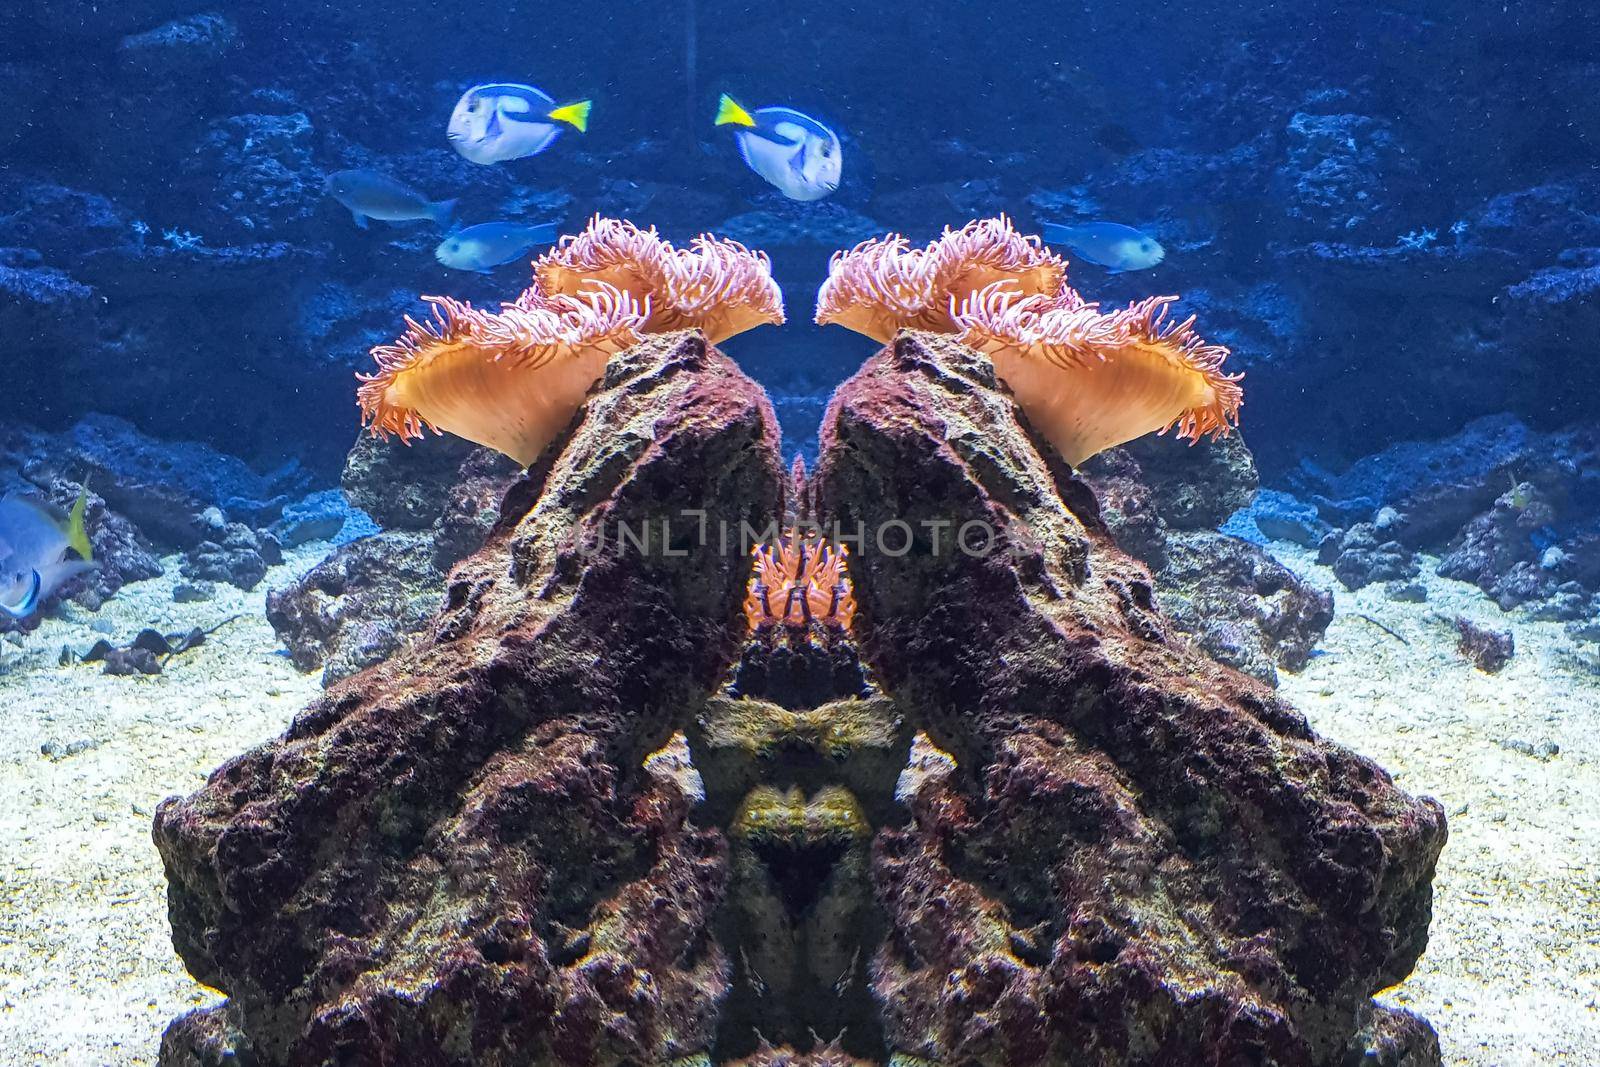 Colorful beautiful fish and underwater landscapes in the sea.            by JFsPic